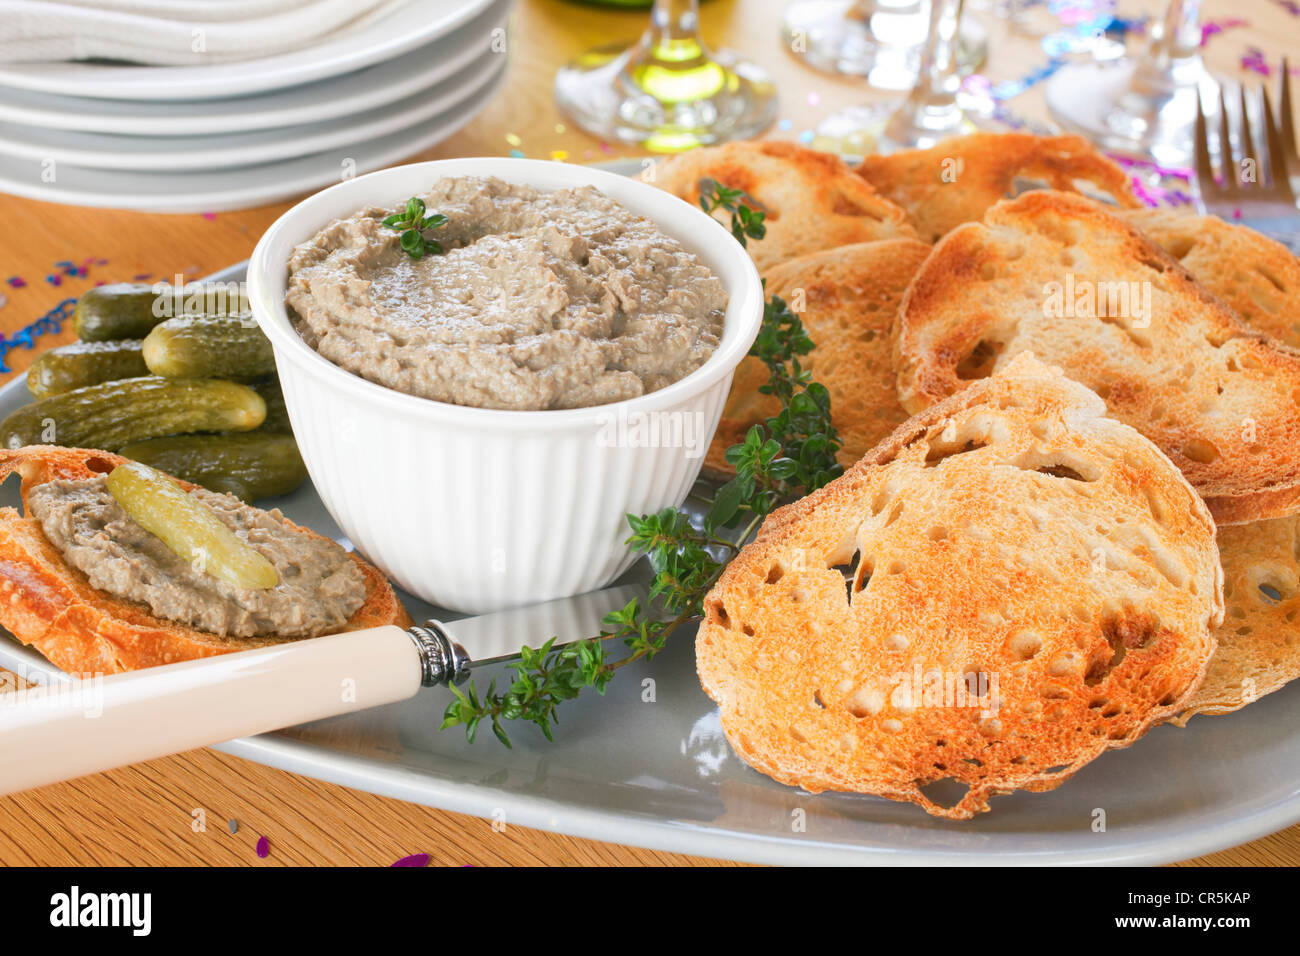 Homemade chicken liver pate with with toasted sourdough and gherkins, arranged on a platter. Stock Photo